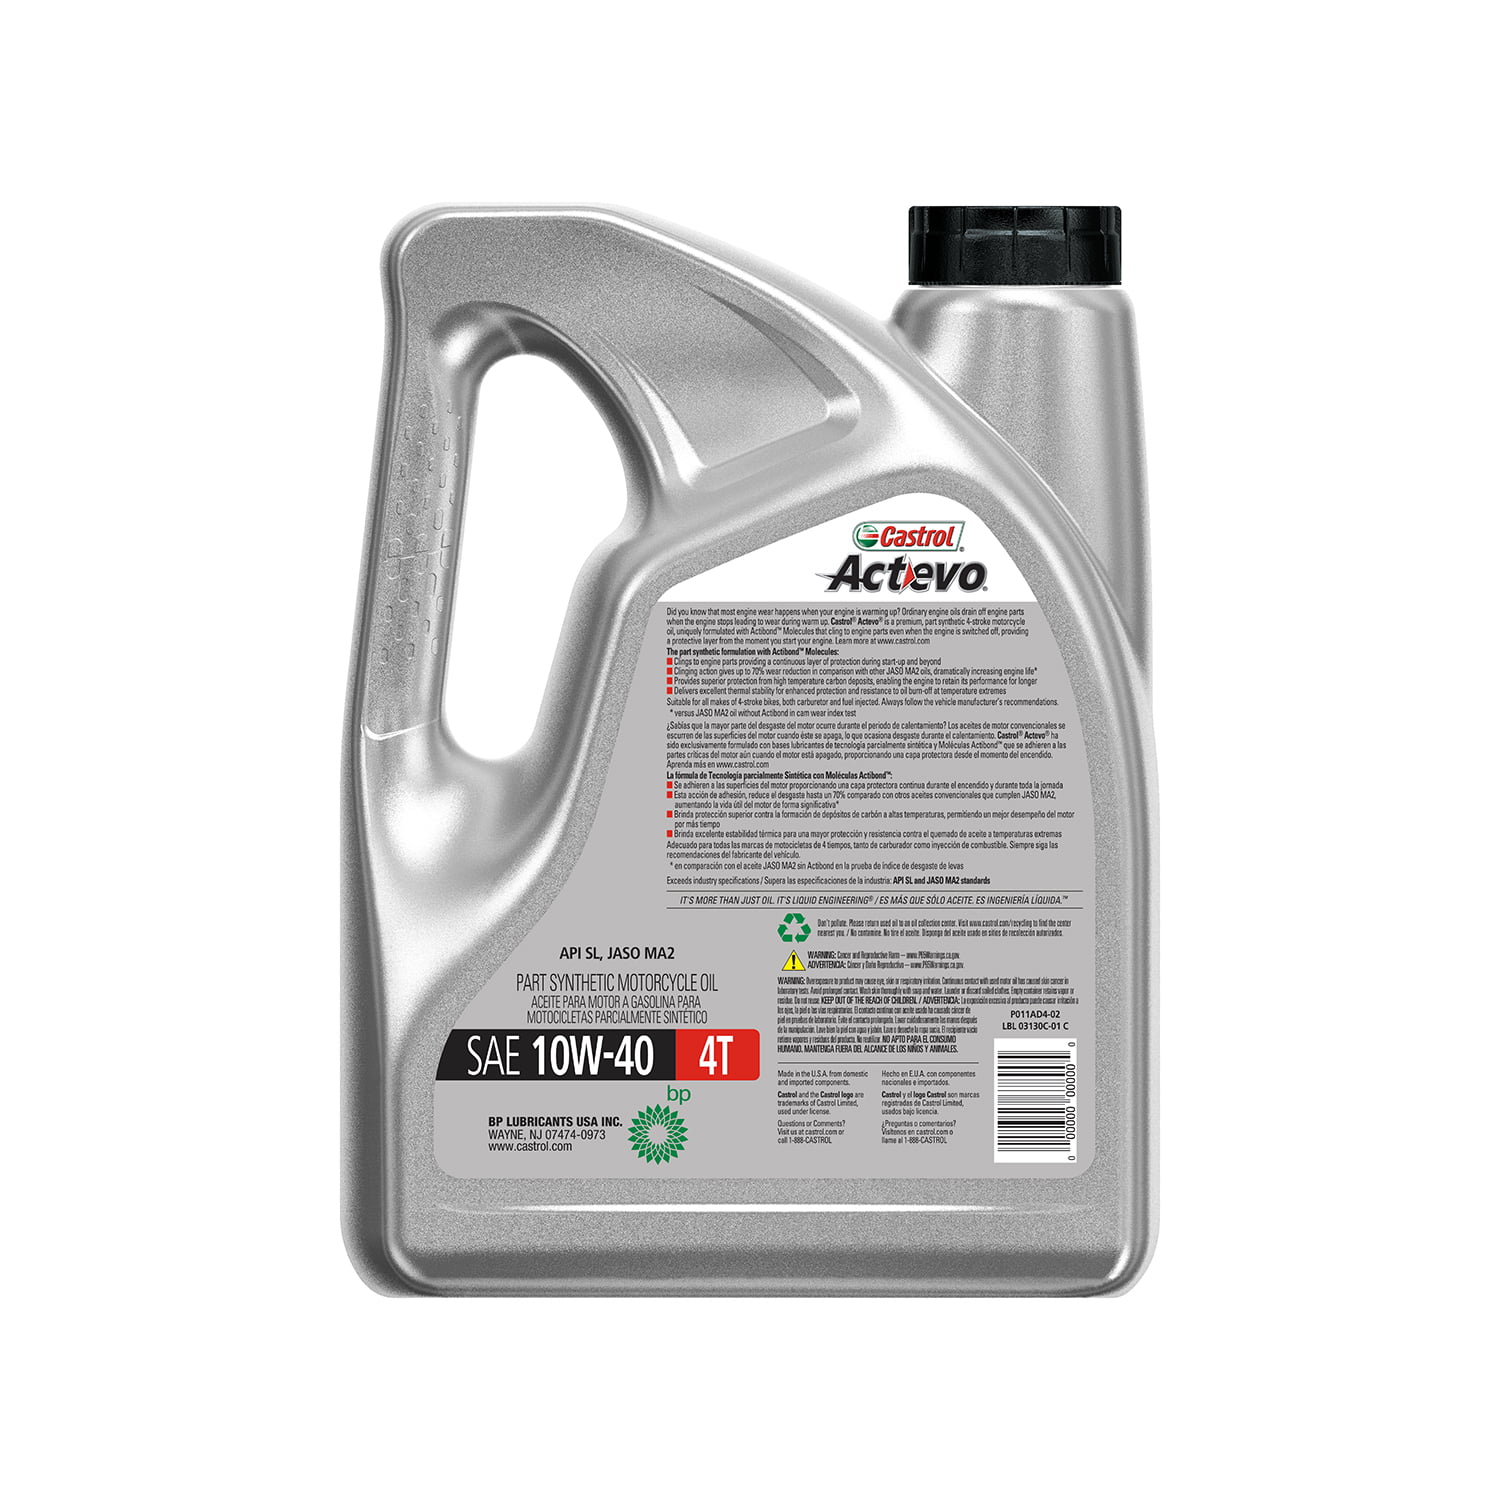 Castrol Actevo 4T 10W-40 Part Synthetic Motorcycle Oil, 1 Gallon - 1